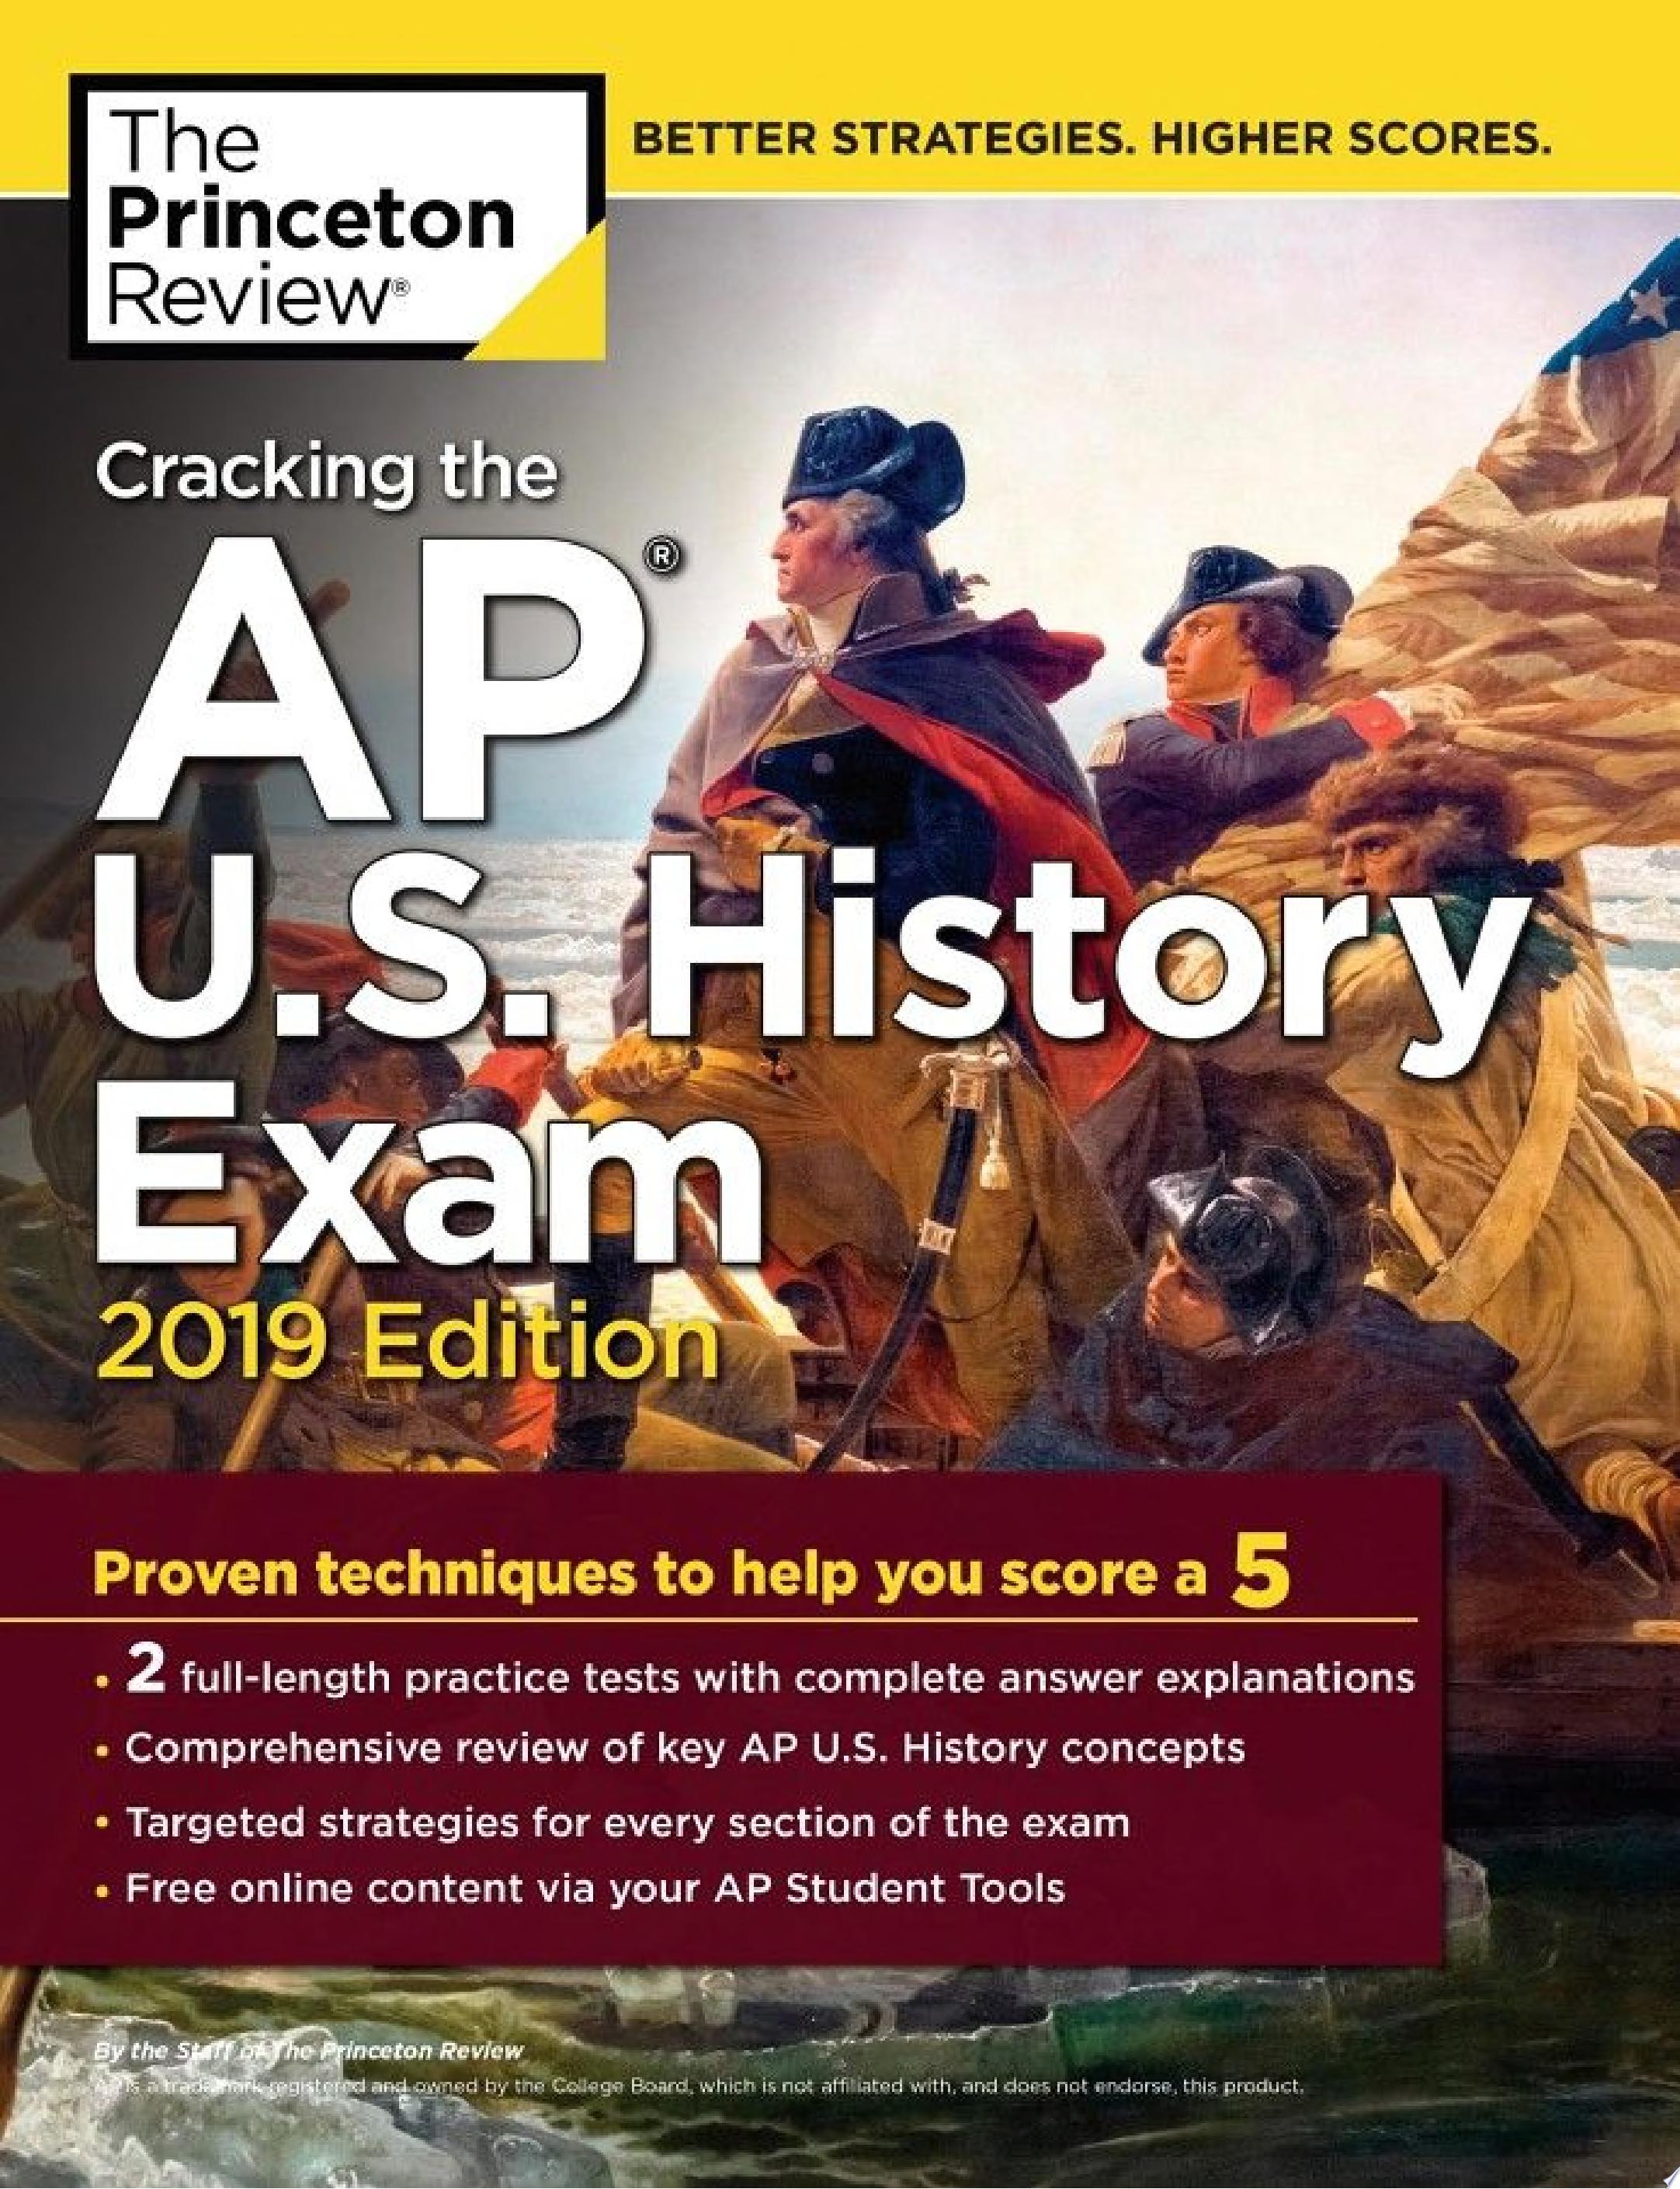 Image for "Cracking the AP U.S. History Exam, 2019 Edition"